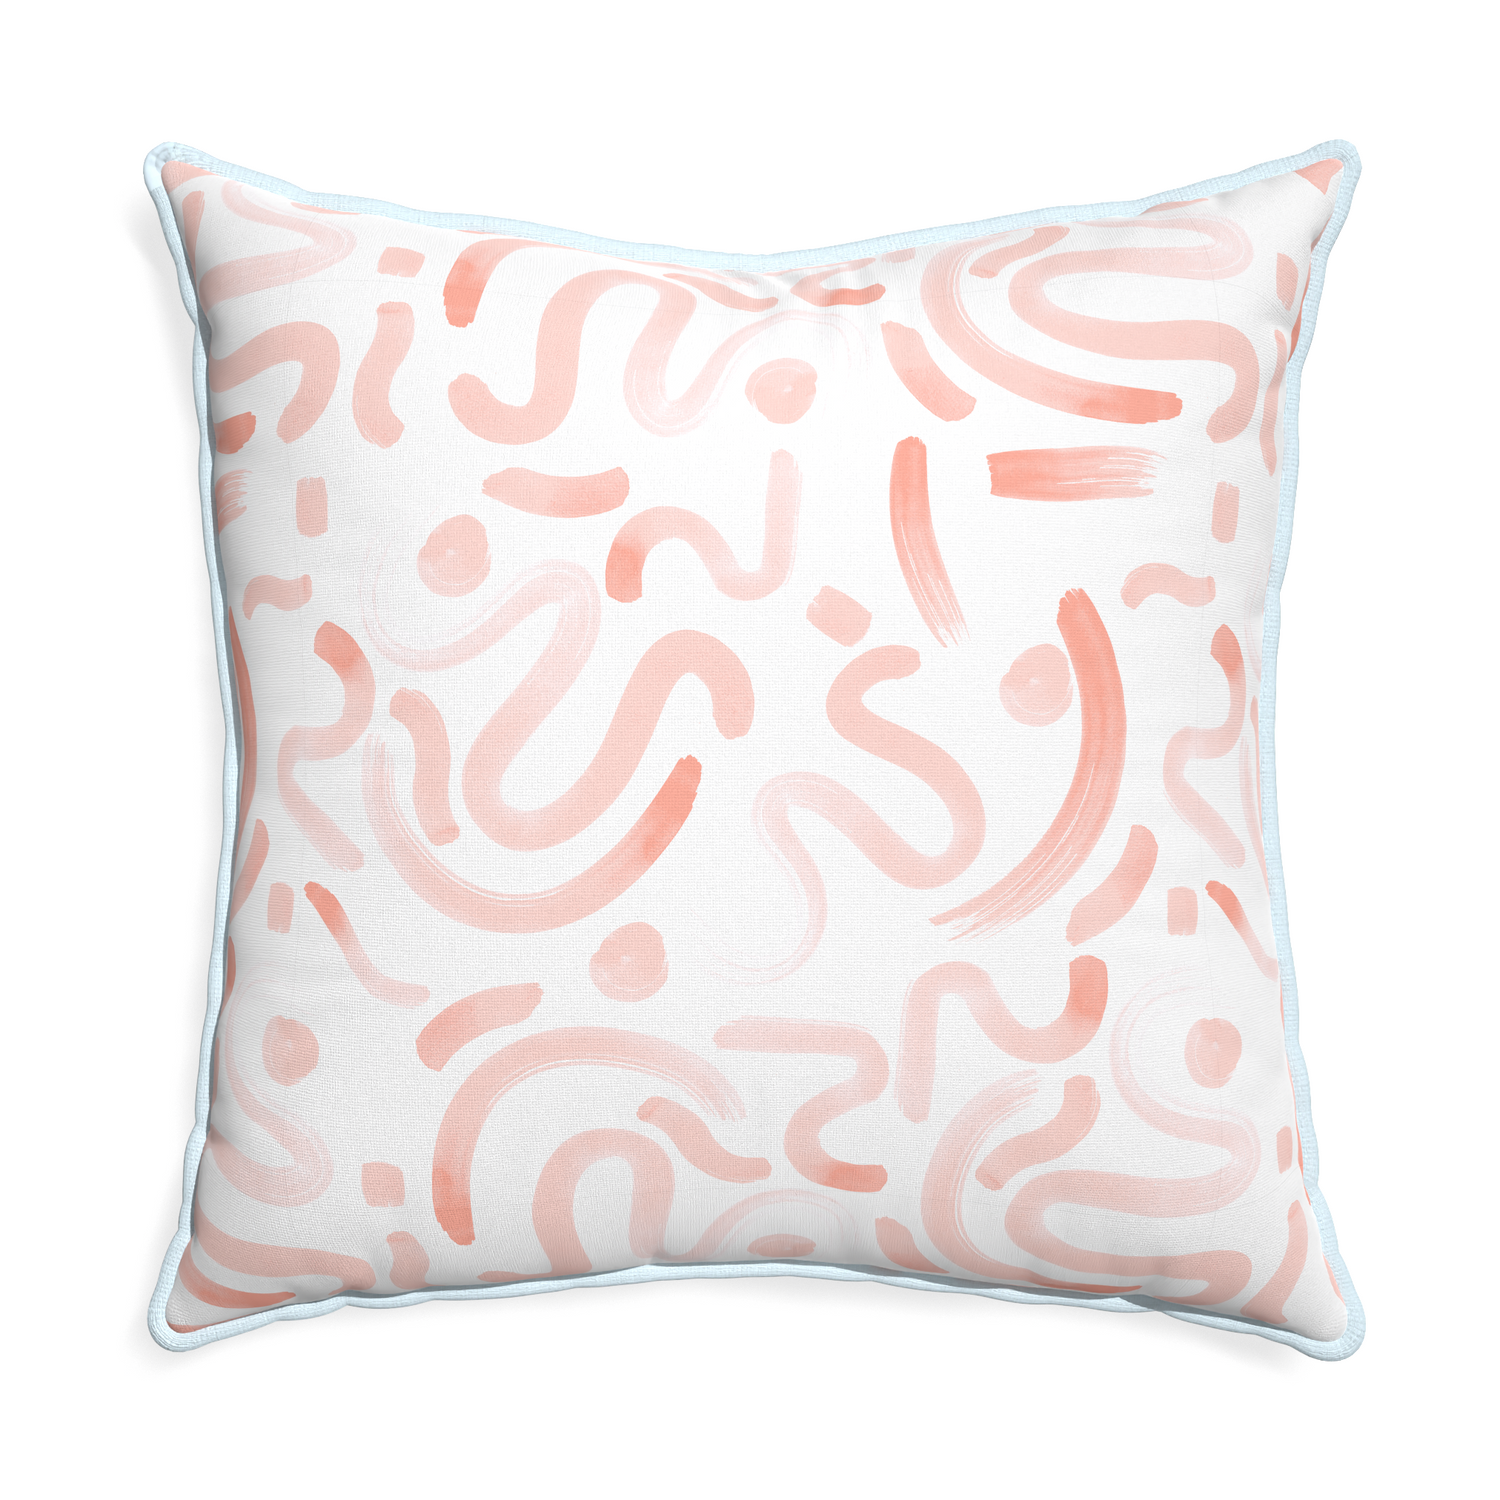 Euro-sham hockney pink custom pink graphicpillow with powder piping on white background